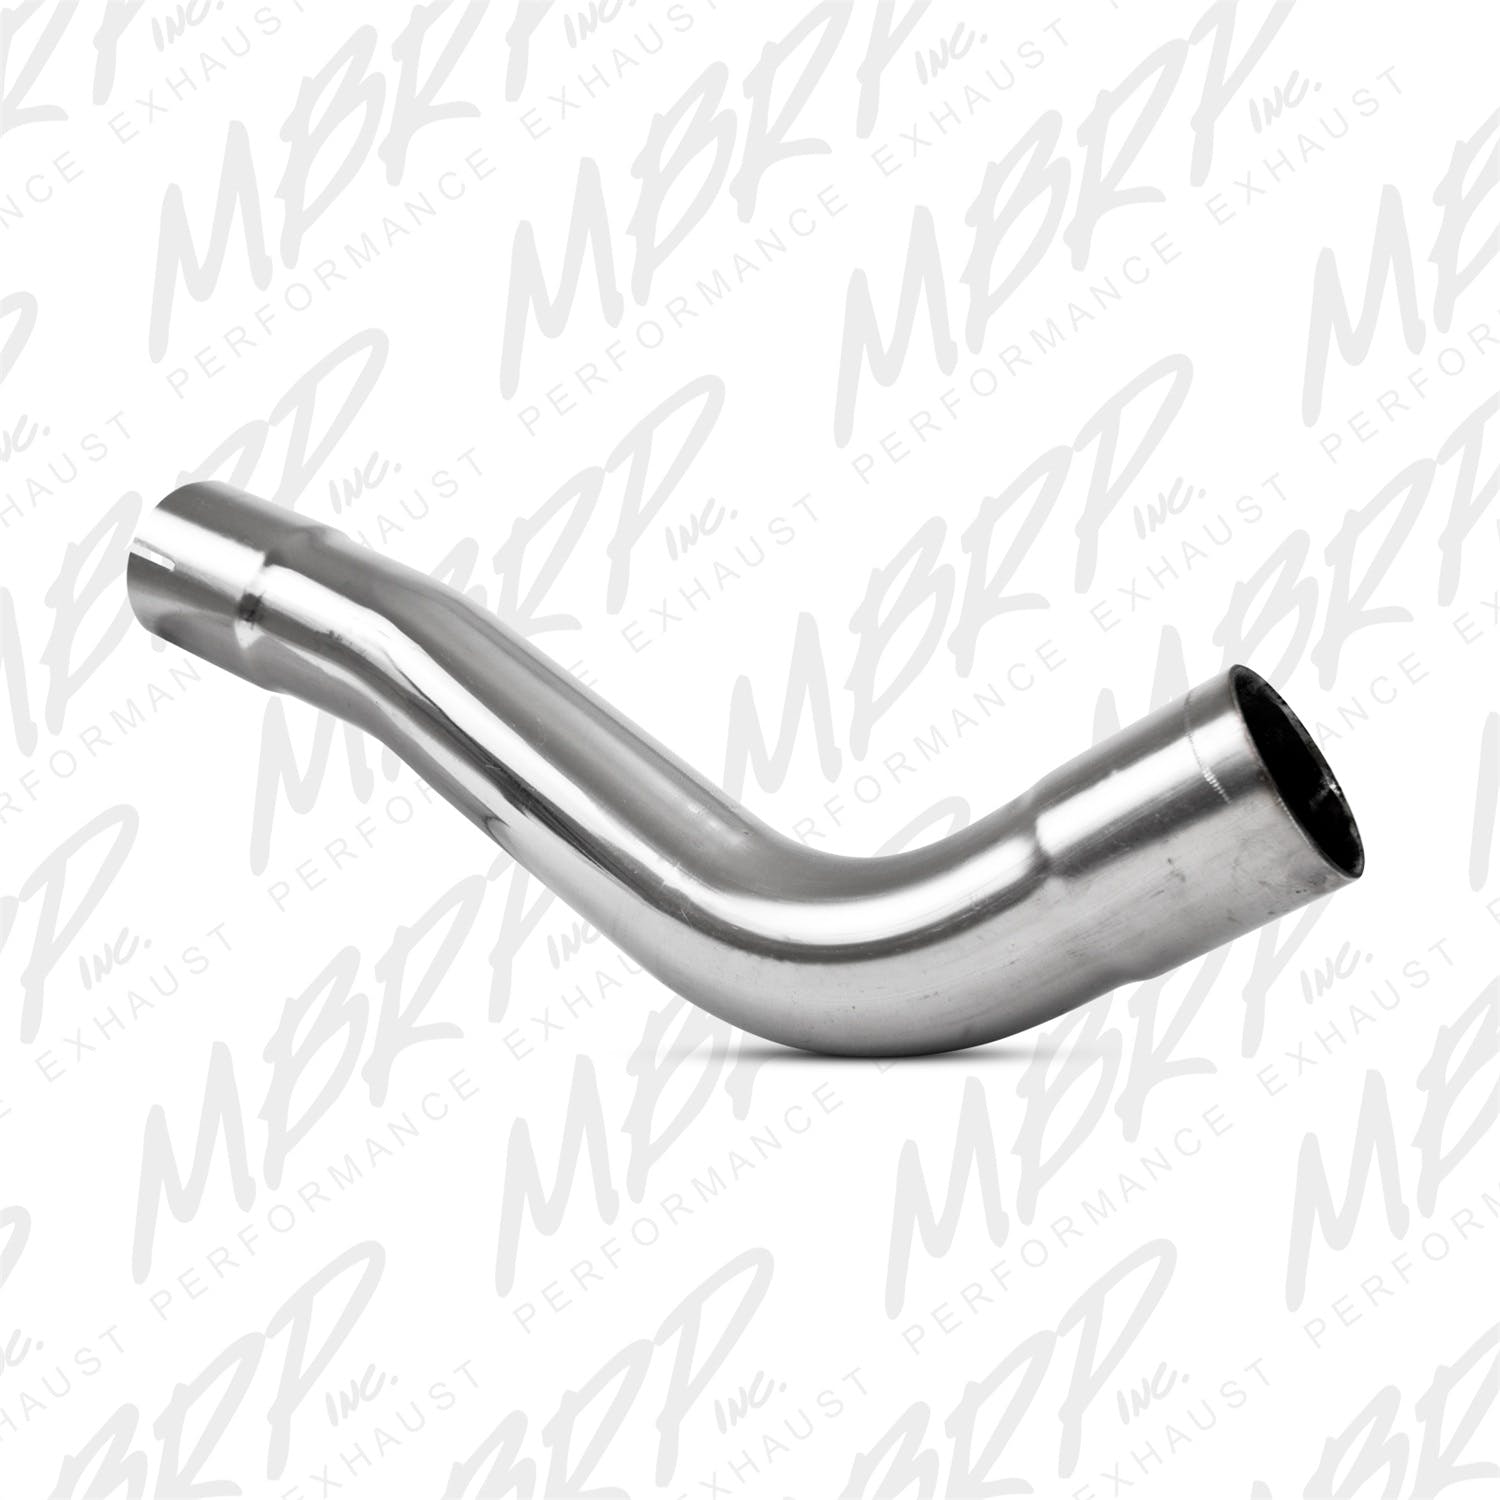 MBRP Exhaust JS9001 Clearance Adapter for Y-Pipe